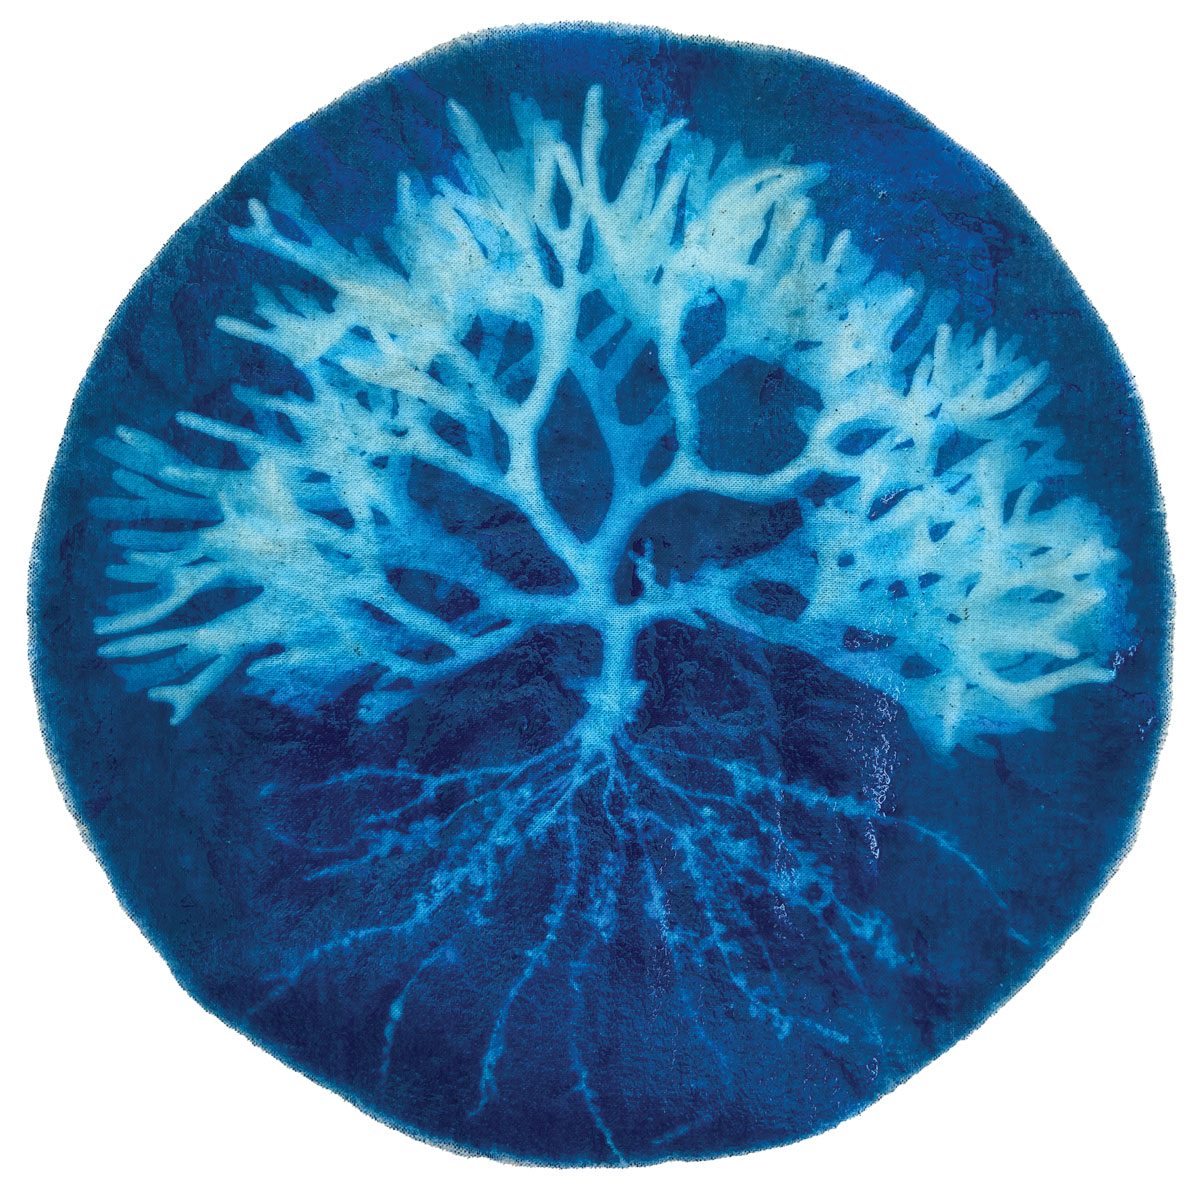 Circular cyanotype print of a plant and all it's roots